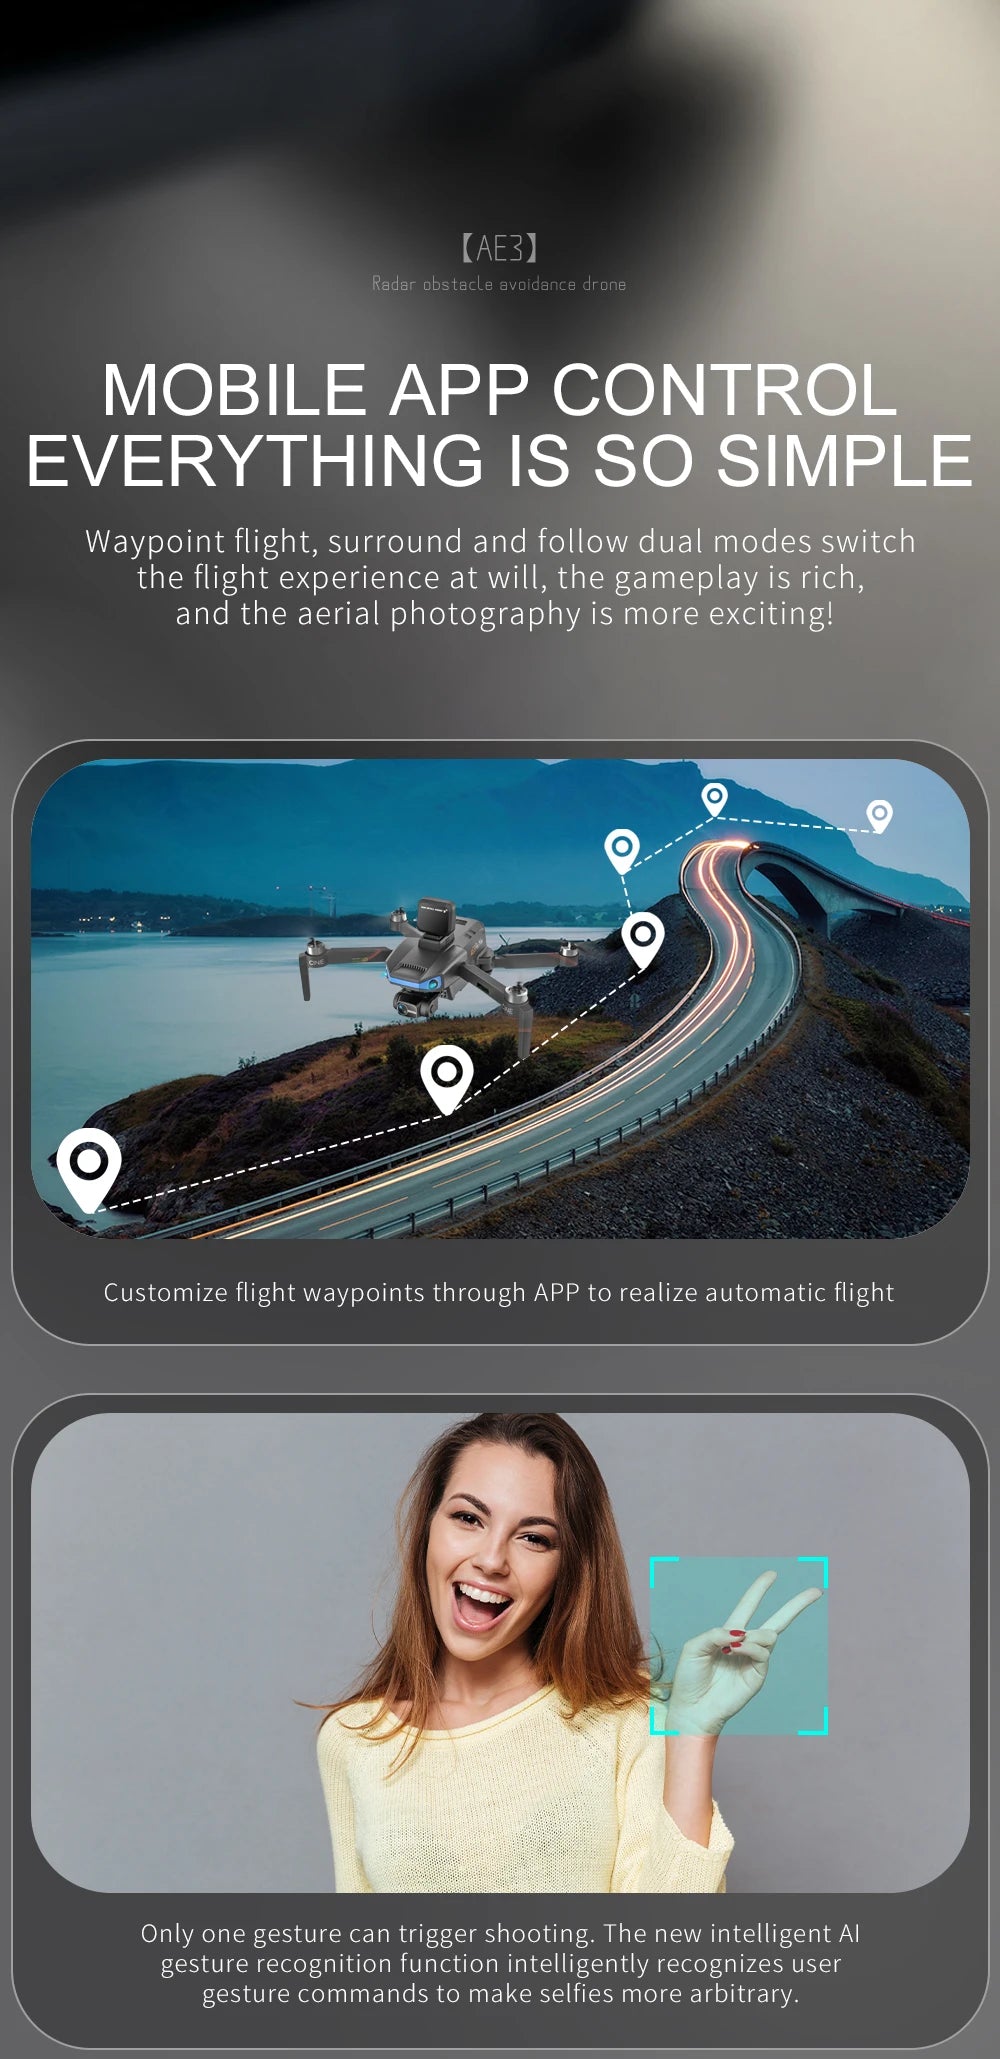 AE3 / AE3 PRO Max GPS Drone, the new intelligent Al gesture recognition function intelligently recognizes user gesture commands